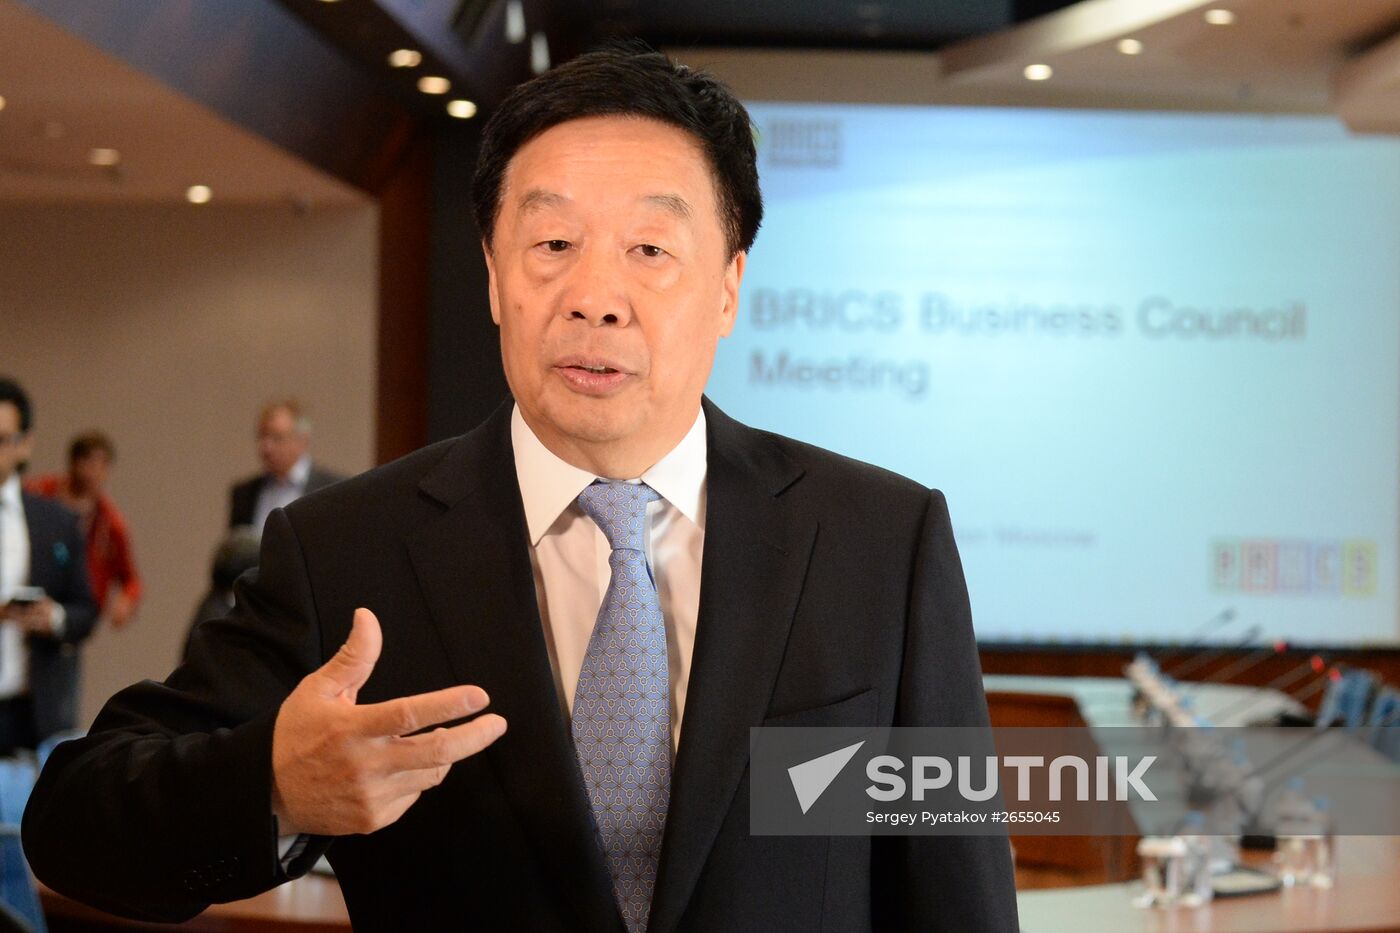 Meeting of BRICS Business Council